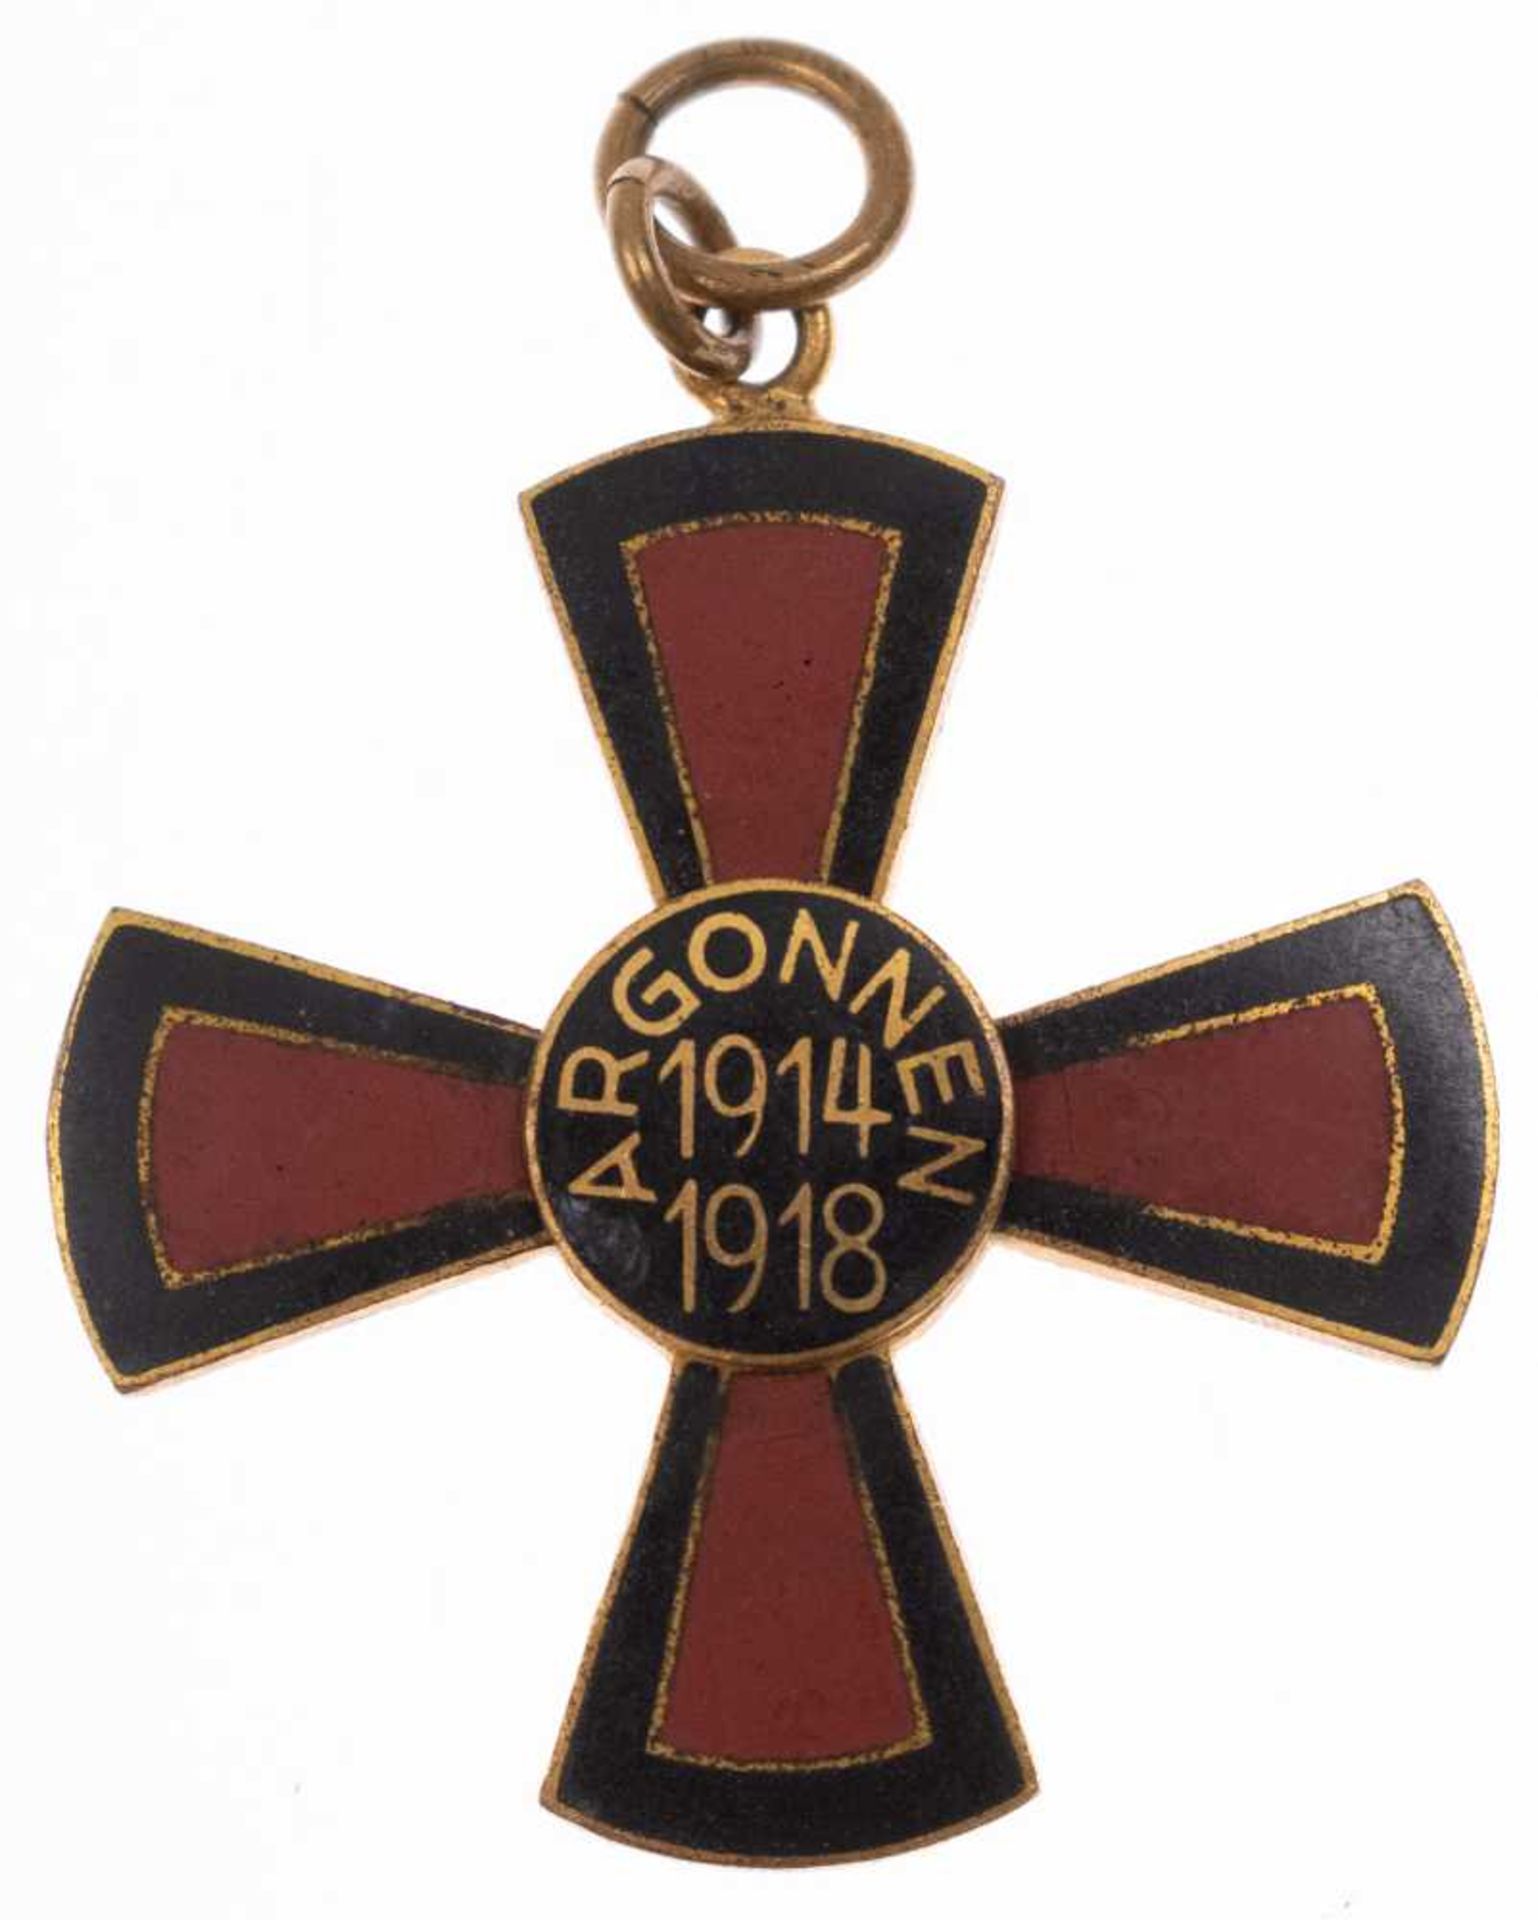 Argonne cross 1914-1918, non-ferrous metal, silver-plated, enameled, on the reverse side with punche